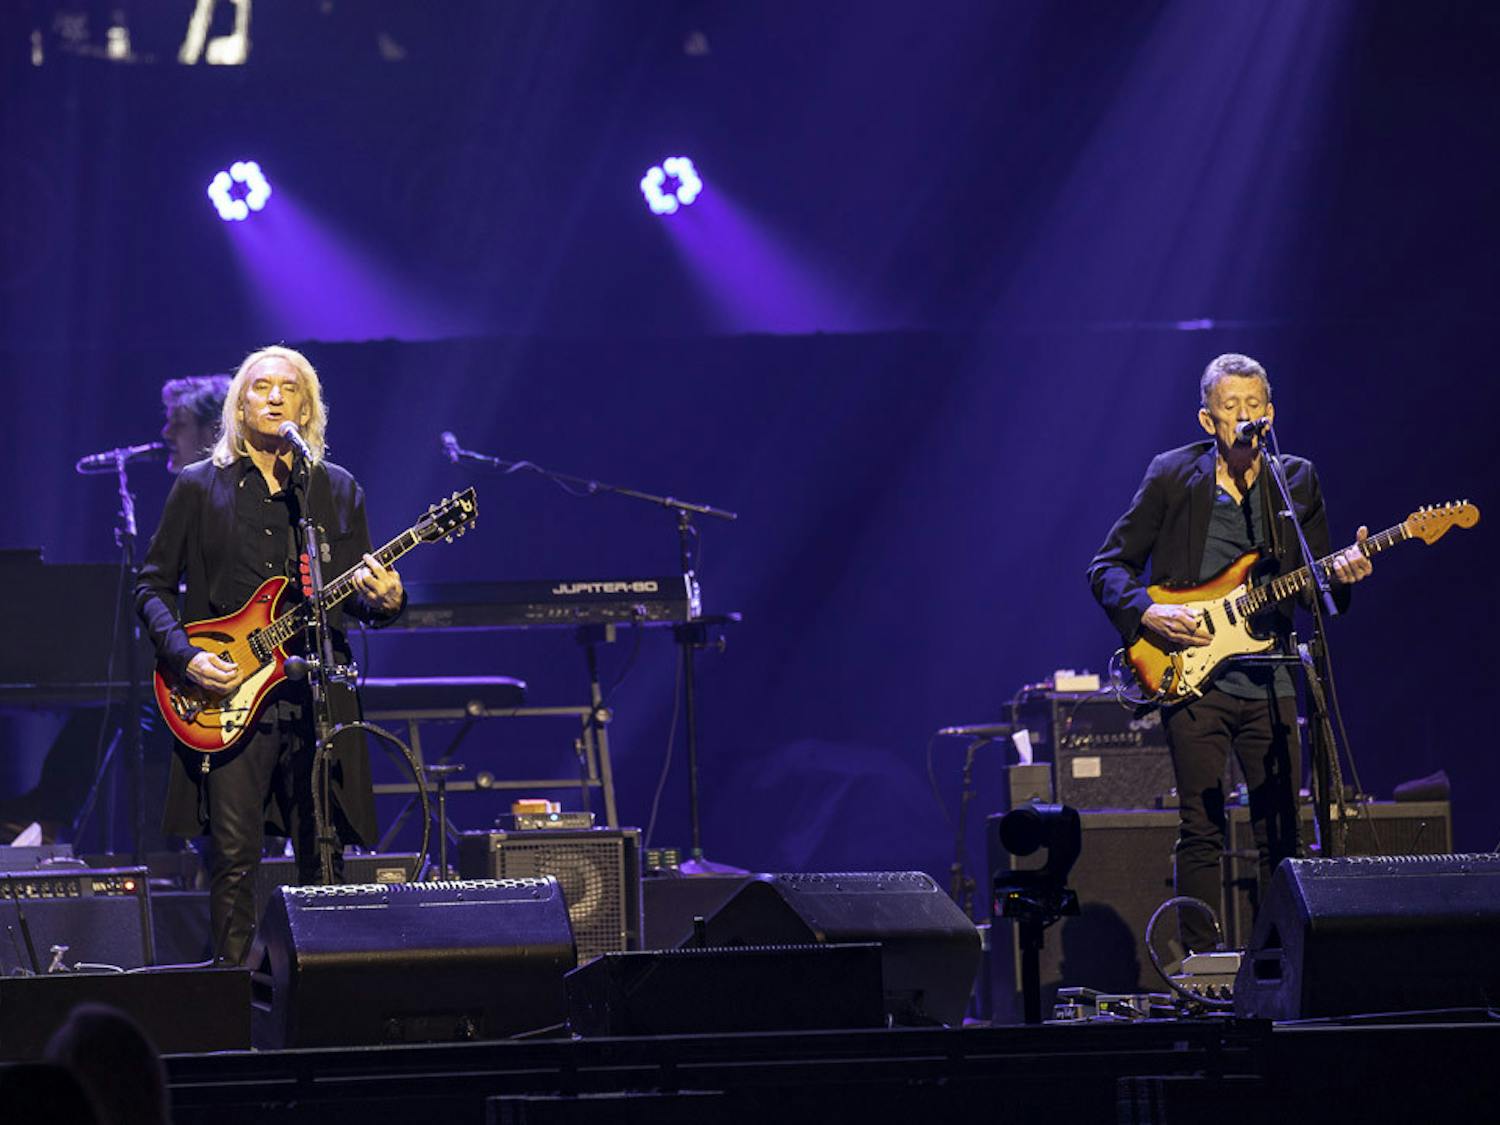 Eagles guitarist Joe Walsh (left) and Steuart Smith (right) perform "New Kid in Town" during the band's "Hotel California" Tour stop at Colonial Life Arena on March 30, 2023. The band performed songs from its "Hotel California" album as well as some of its greatest hits.